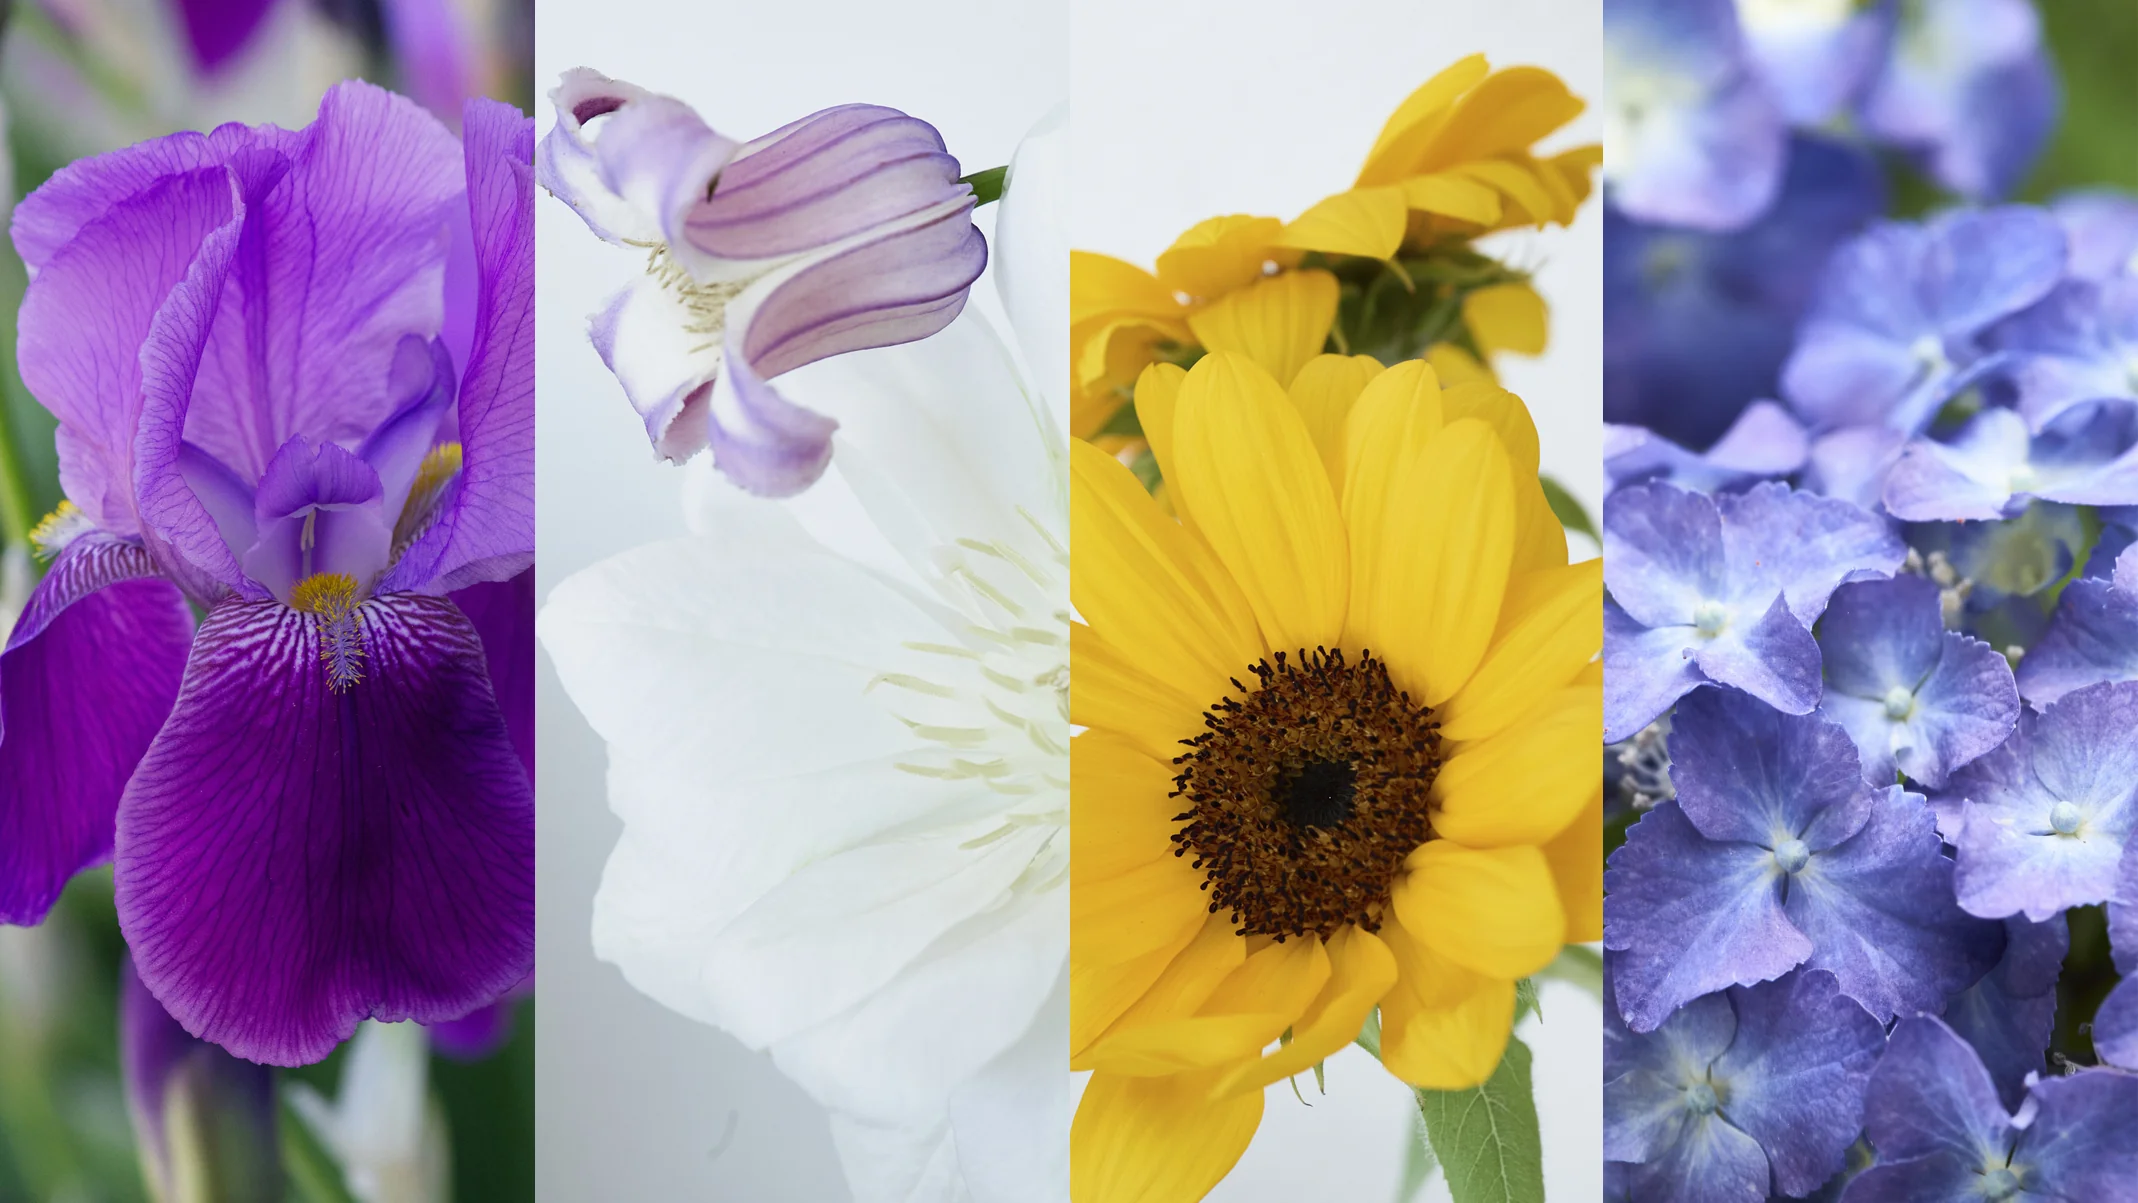  Summer’s Palette: The Radiant Beauty of Flowers